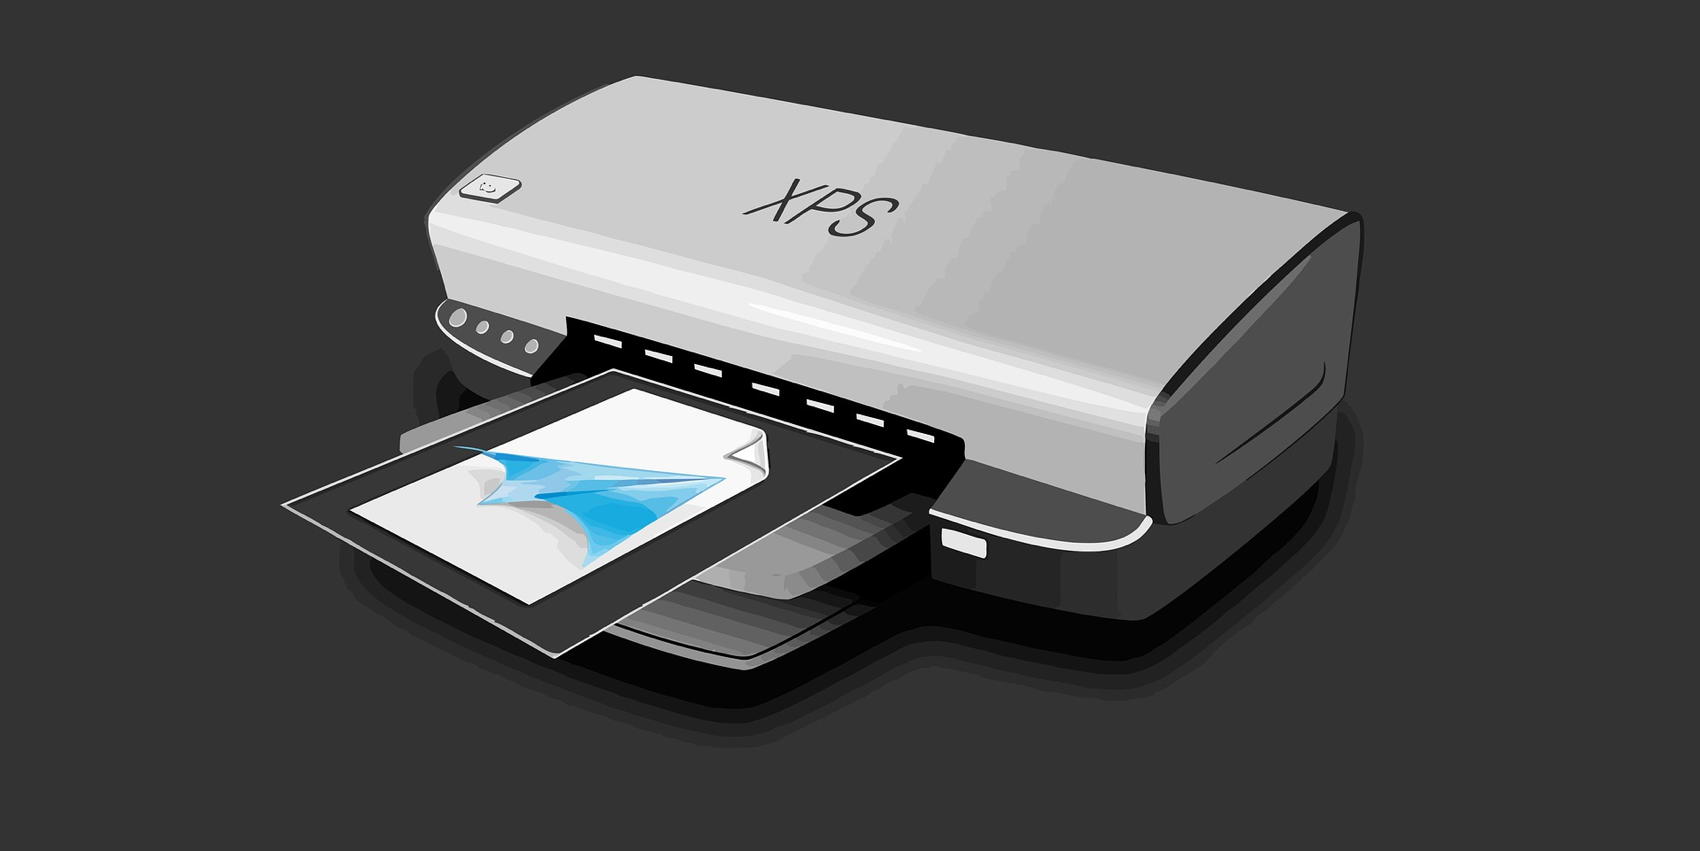 Multi-Function Printer - Image by Collar from Pixabay